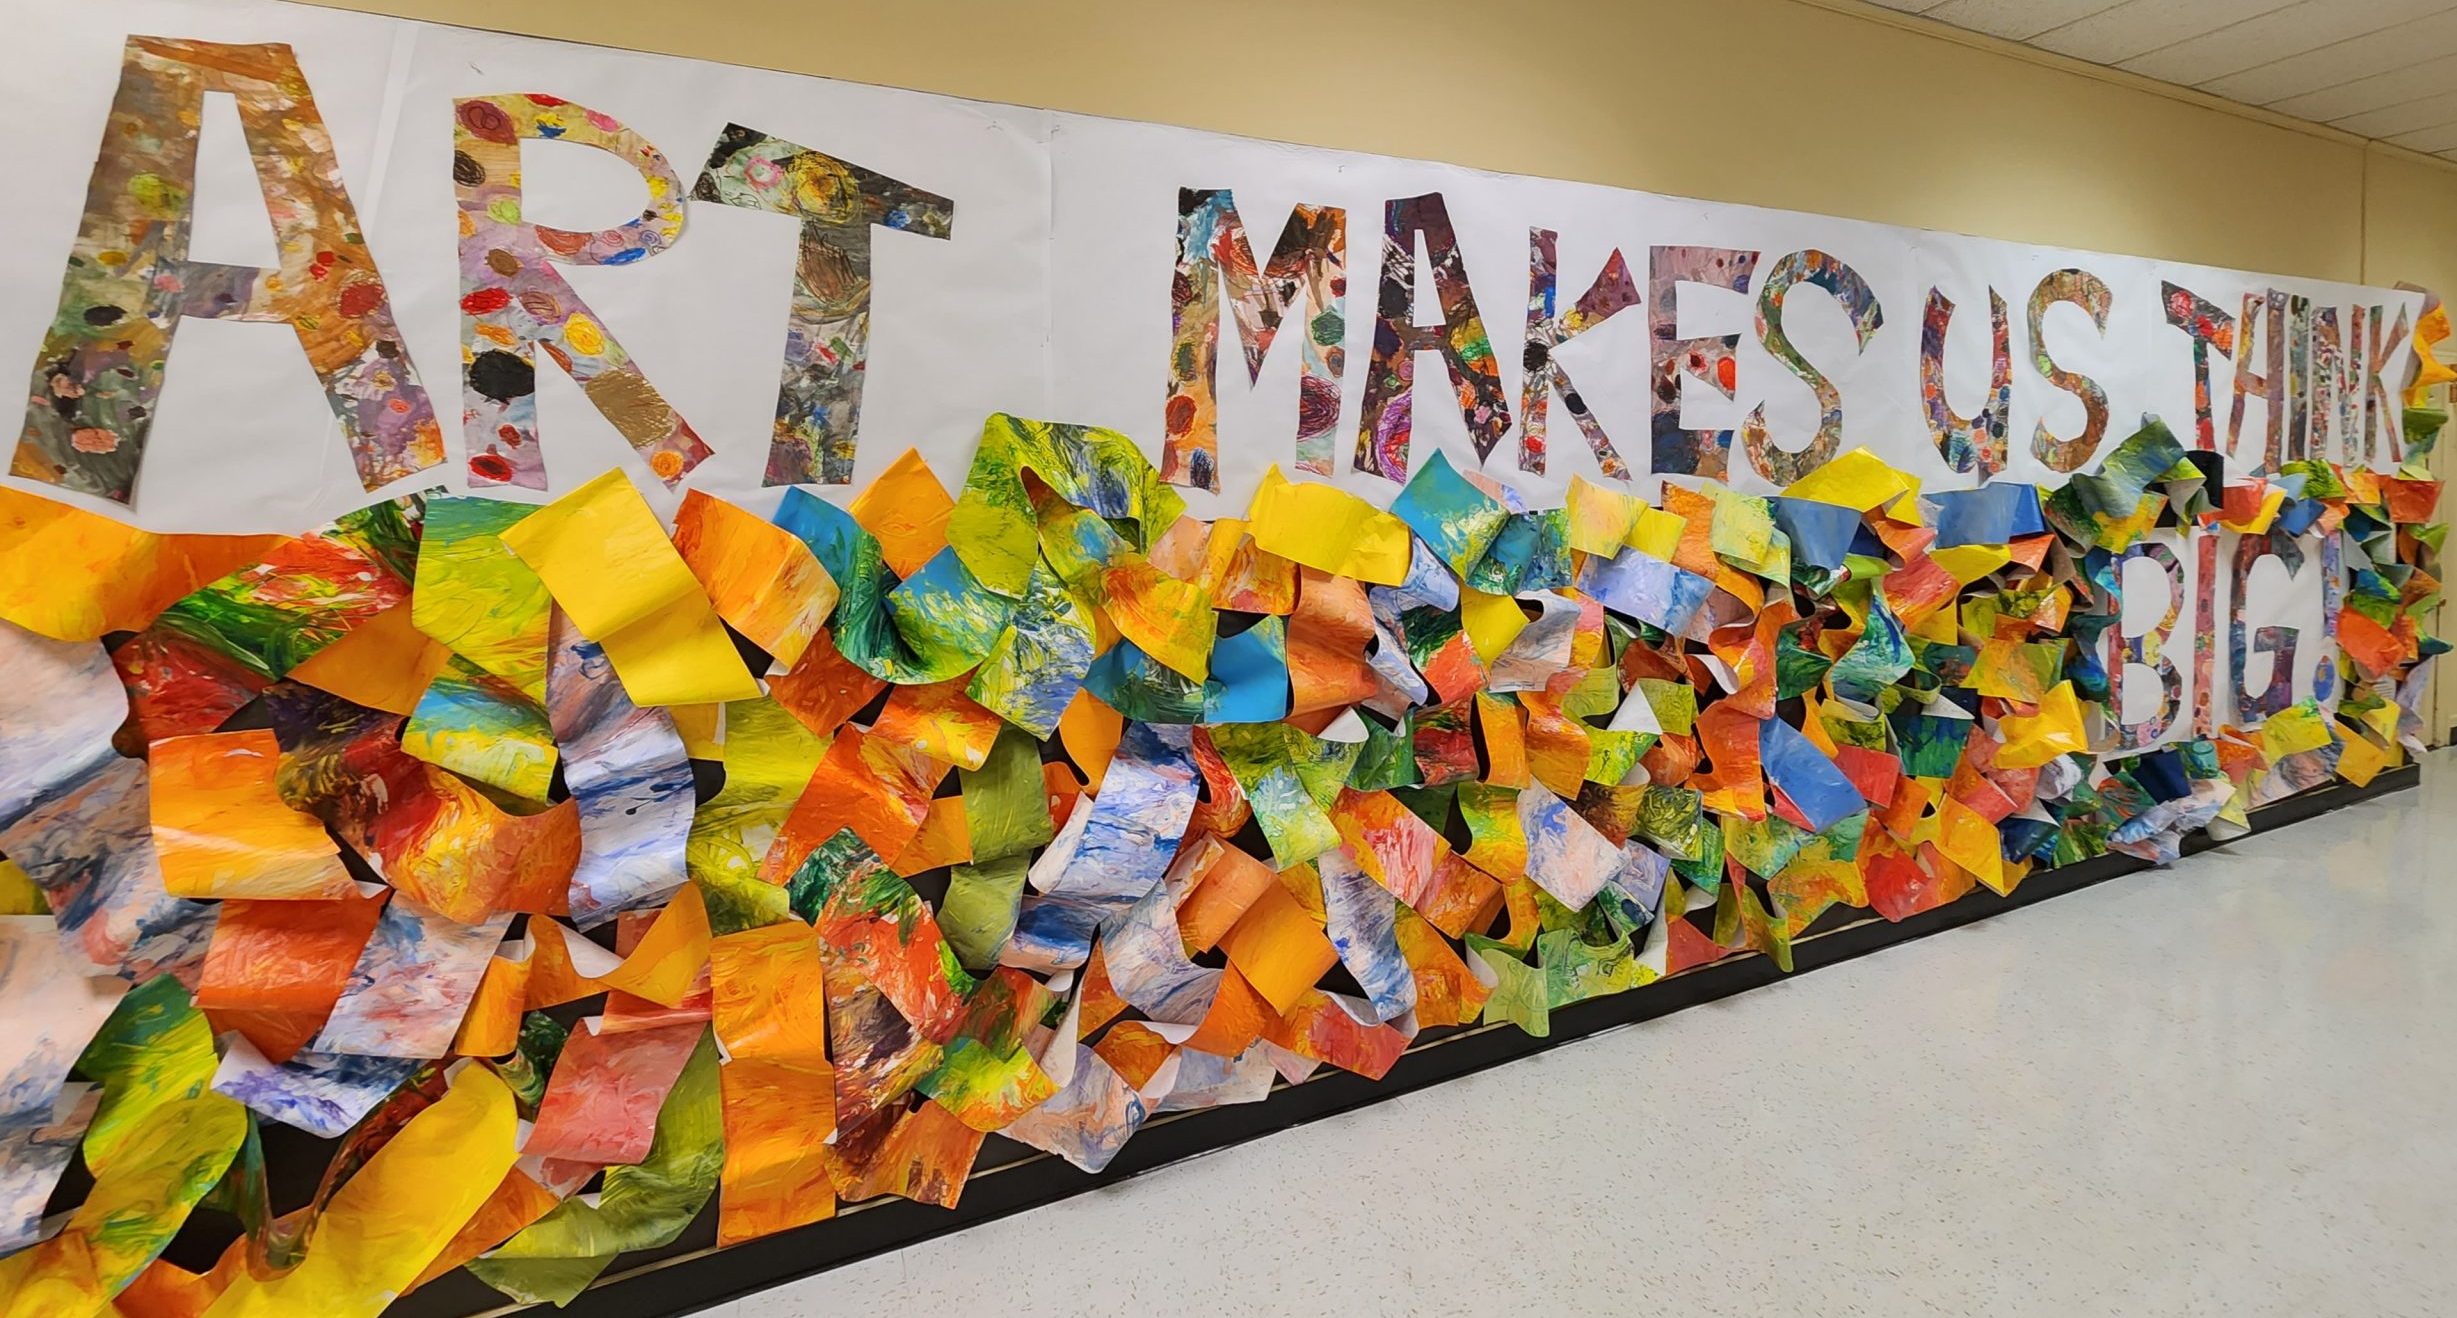 For the month of October 2022, Tuscan Elementary, art teacher, Andrew Dean curated "Art Makes Us Think Big" showcasing the artwork of Tuscan Elementary students at the District Central Office building.